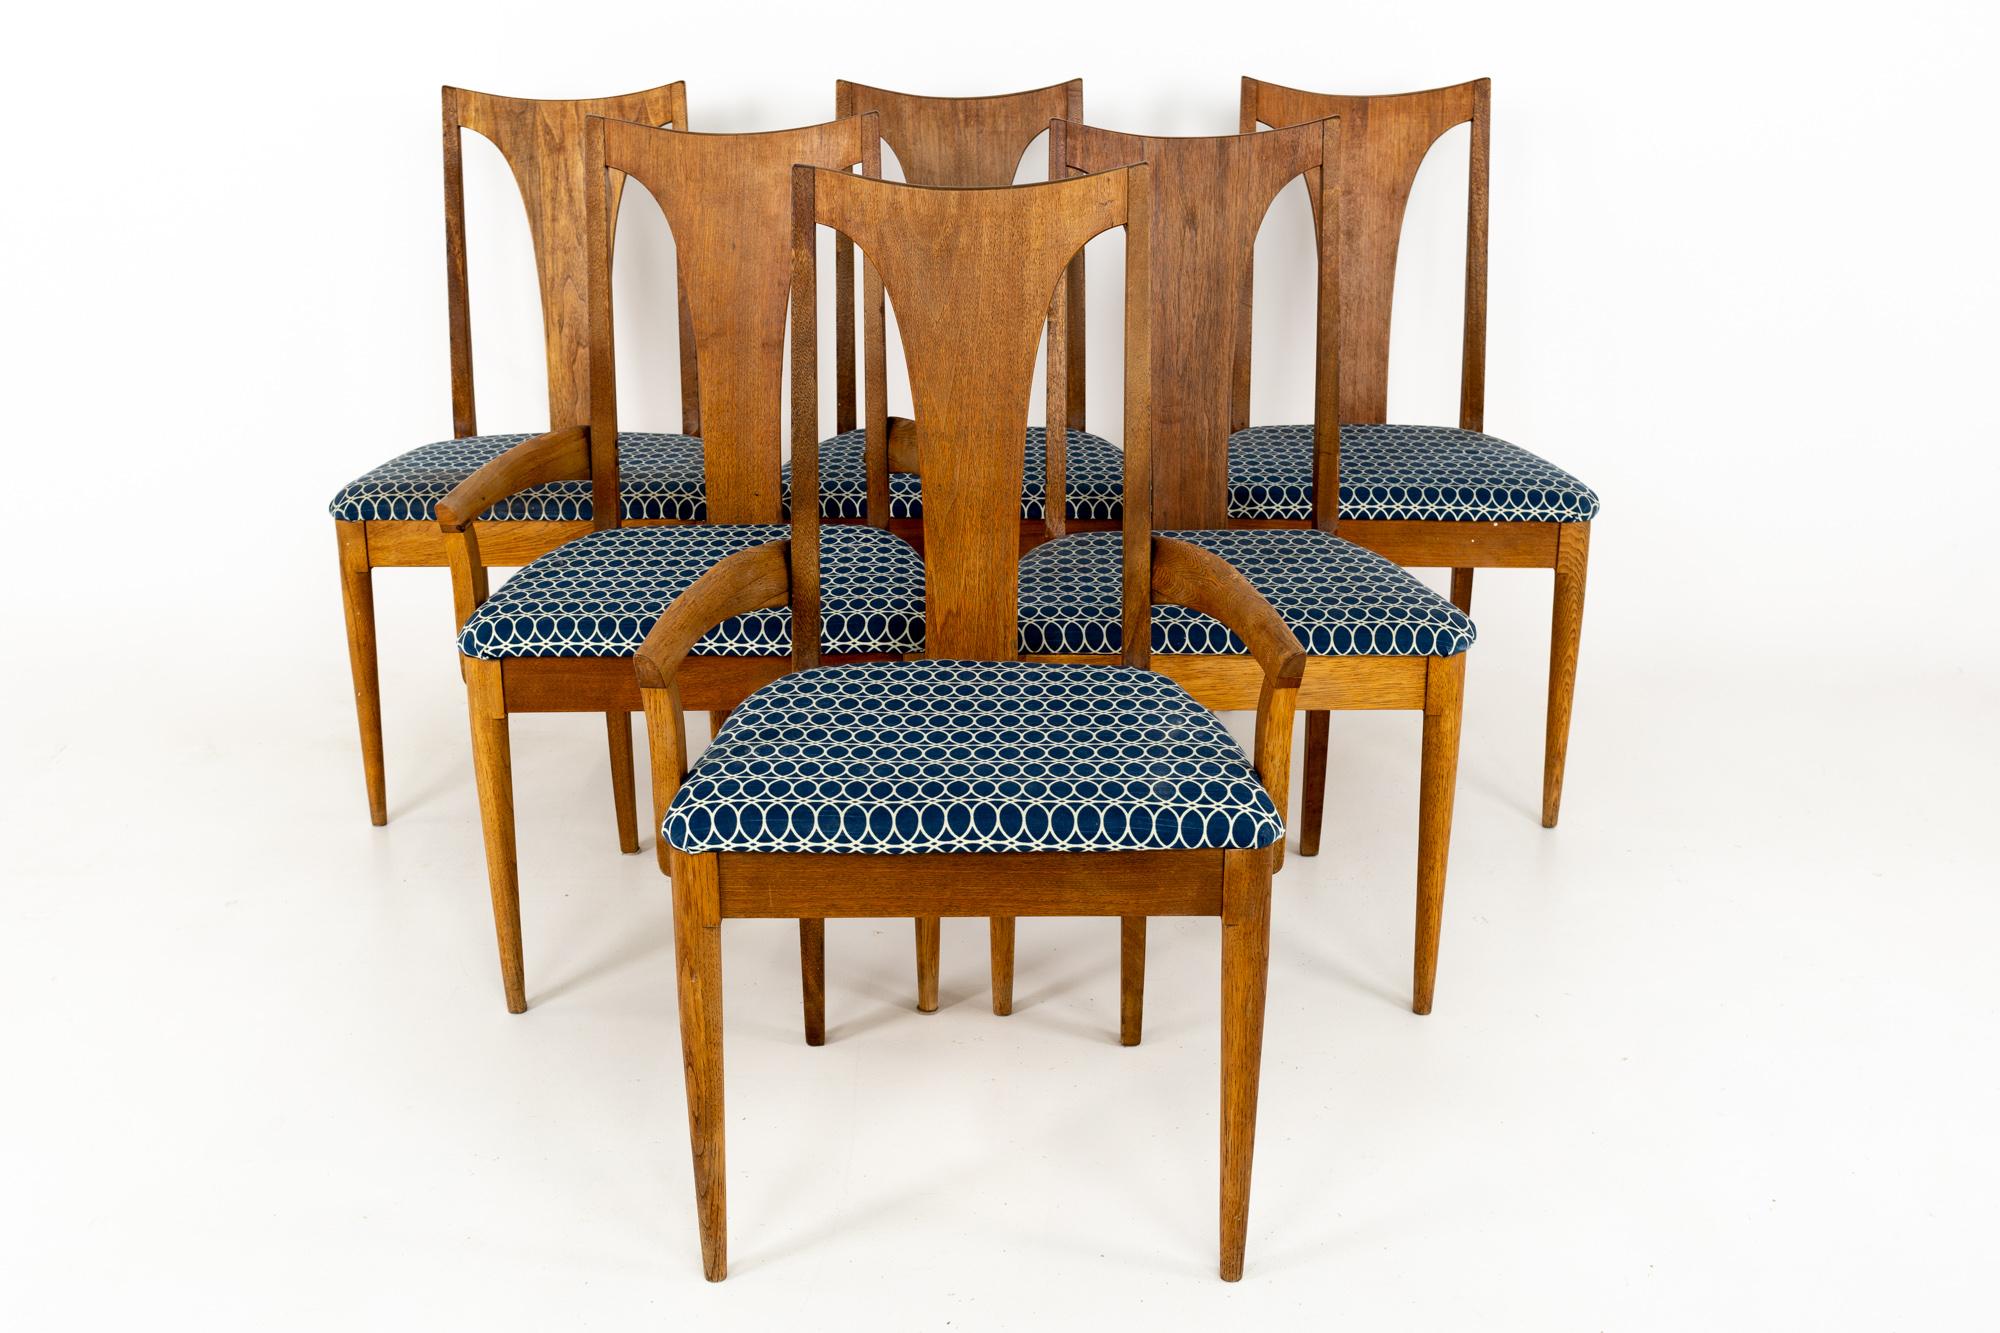 Broyhill Brasilia II midcentury walnut Brutalist dining chairs, set of 6
These chairs are 22.75 wide x 21 deep x 37 inches high, with a seat height of 18.25 and an arm height of 22.5 inches

This set is available in what we call restored vintage